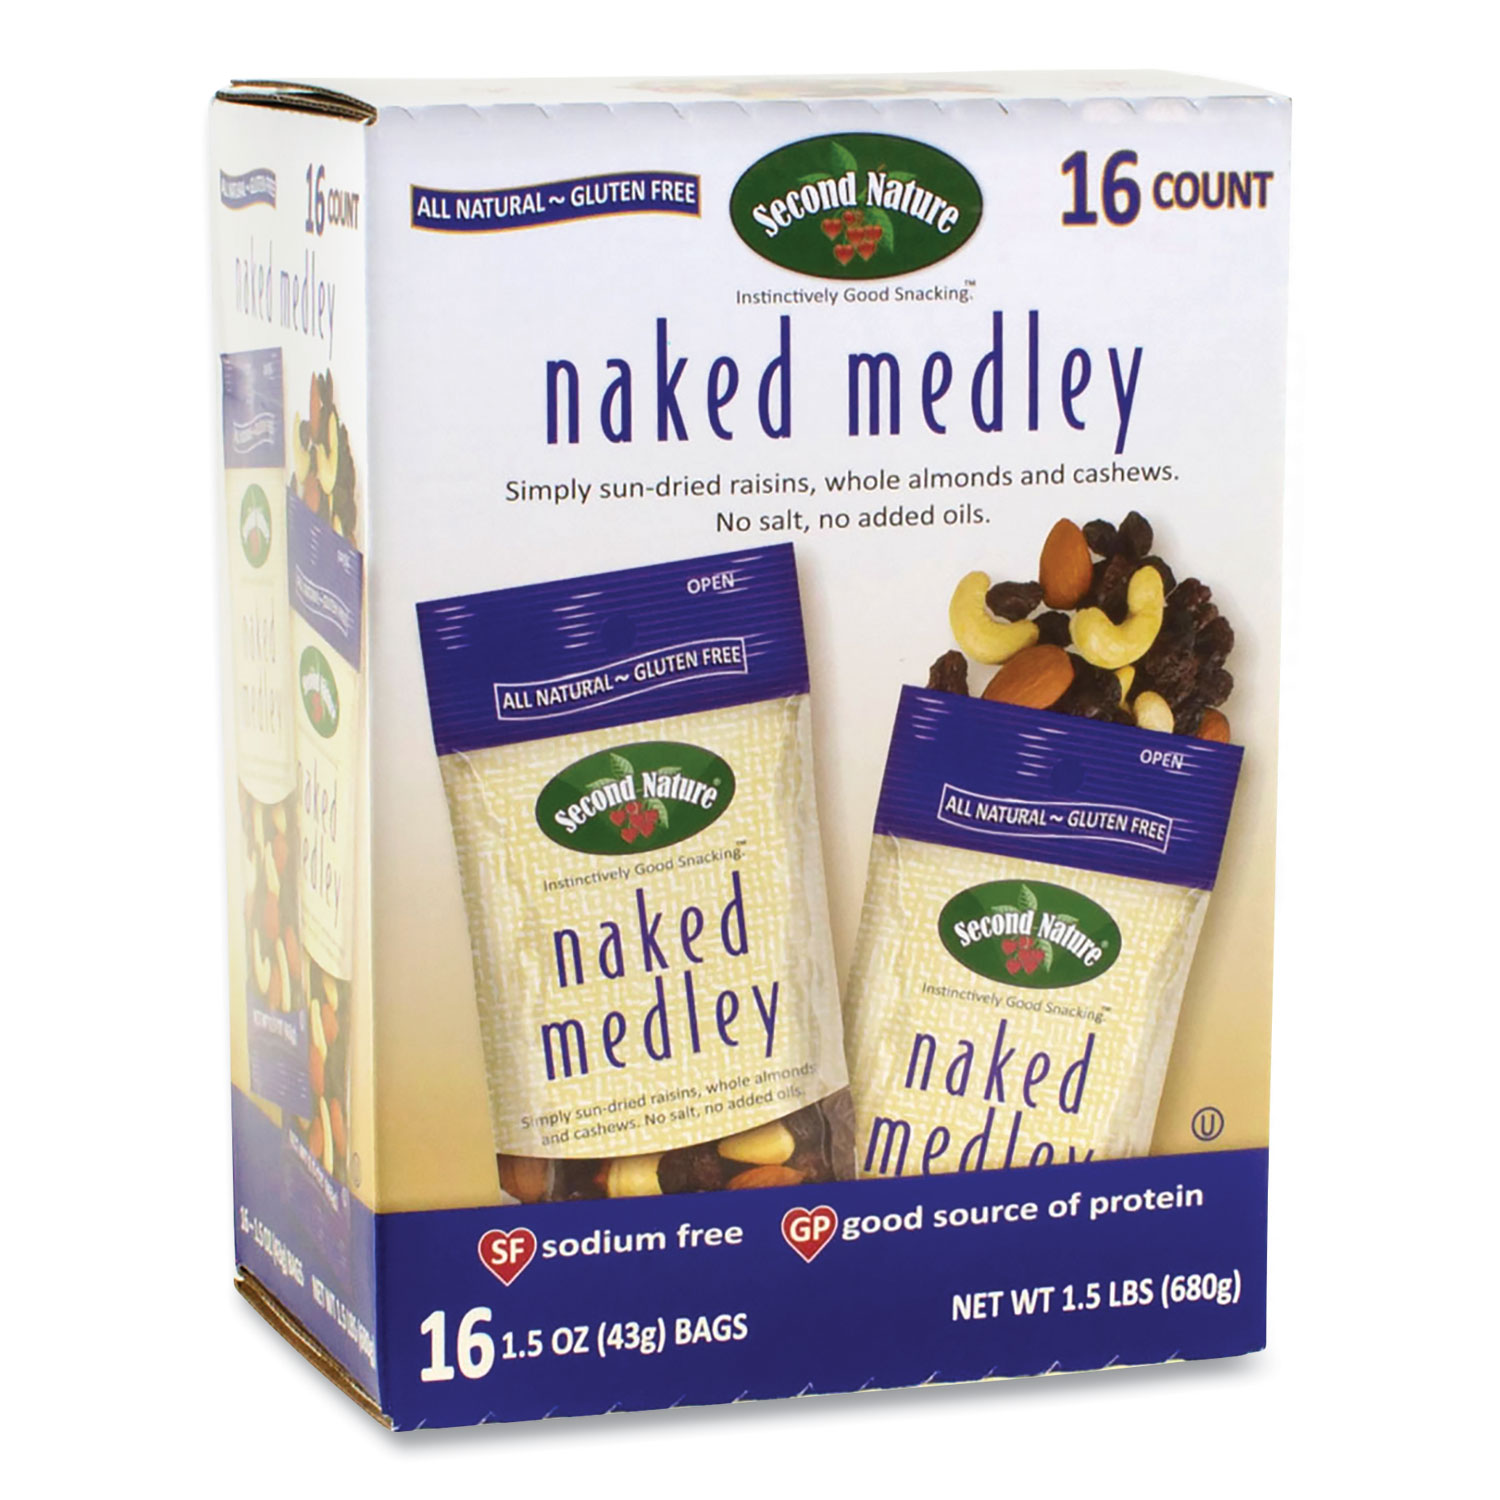  Second Nature 31766 Naked Medley Trail Mix, 1.5 oz Bag, 16 Bags/Box, Free Delivery in 1-4 Business Days (GRR22000416) 